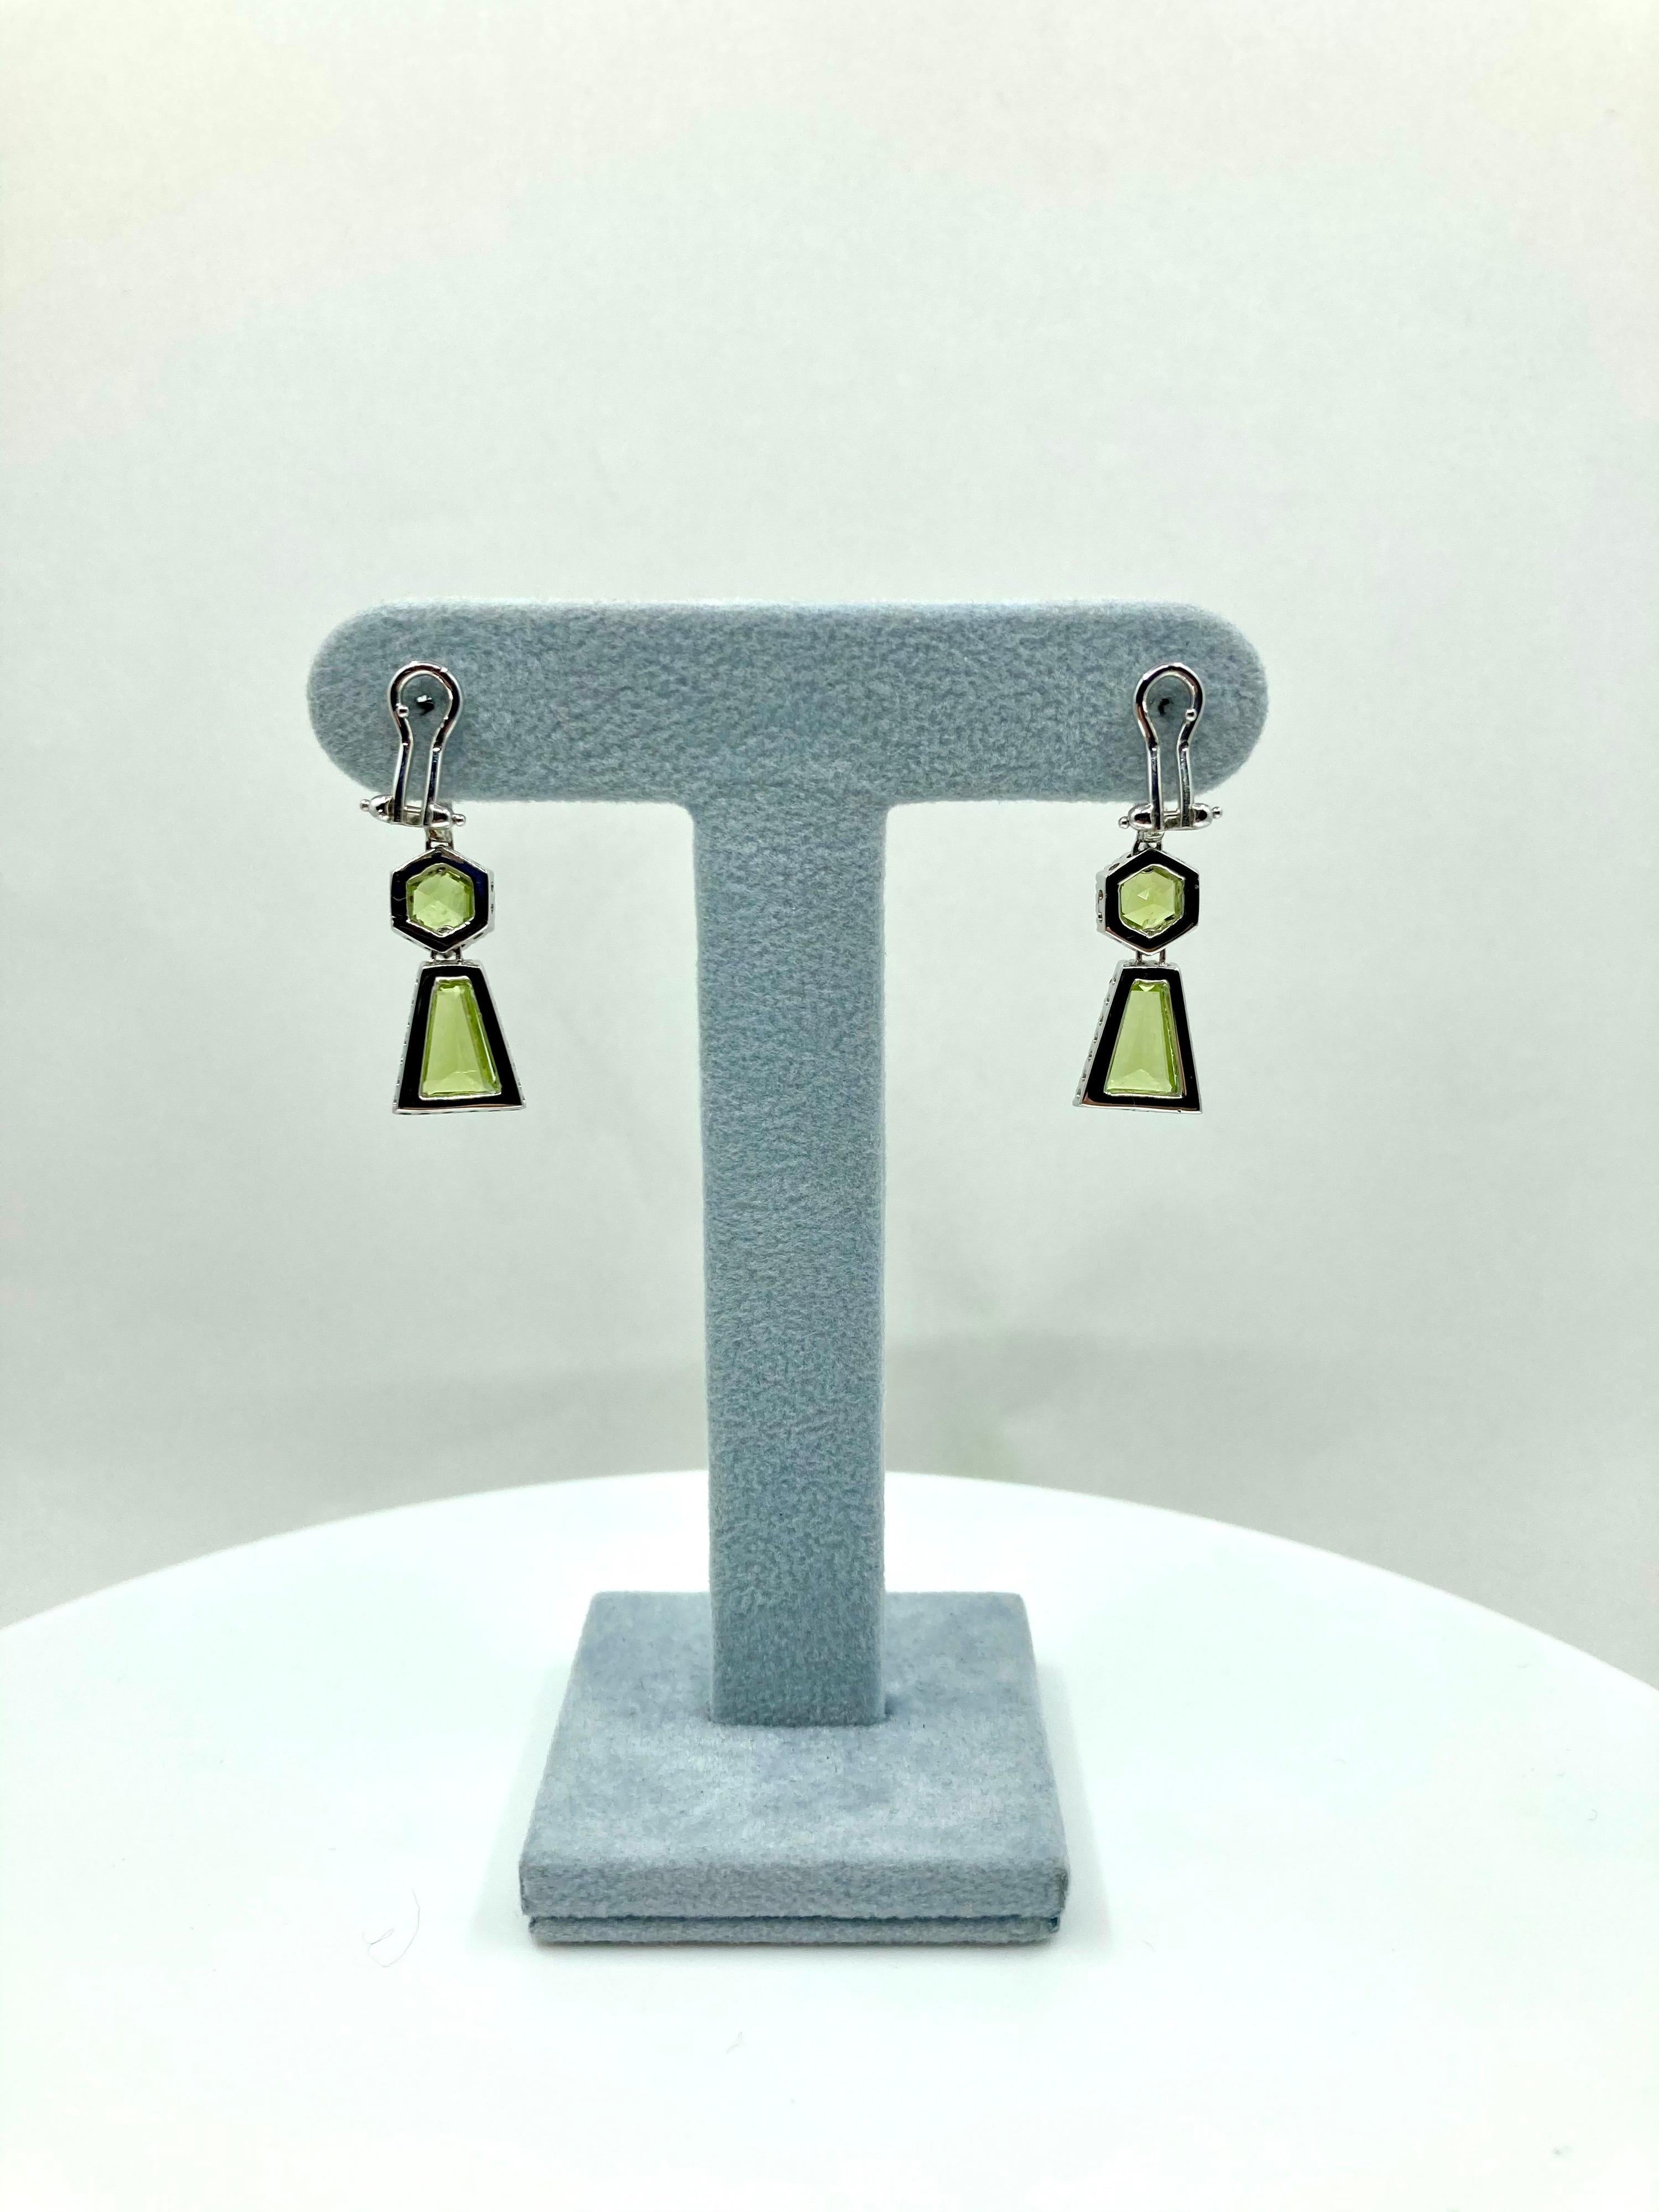 Timeless fine White Gold earrings, with Peridot ct. 3,50 and Diamonds ct. 0,92, Made in Italy by Roberto Casarin. 

For those who are fond of Peridot, these earrings will surely catch the attention. A modern yet timeless design, the two trapezoid